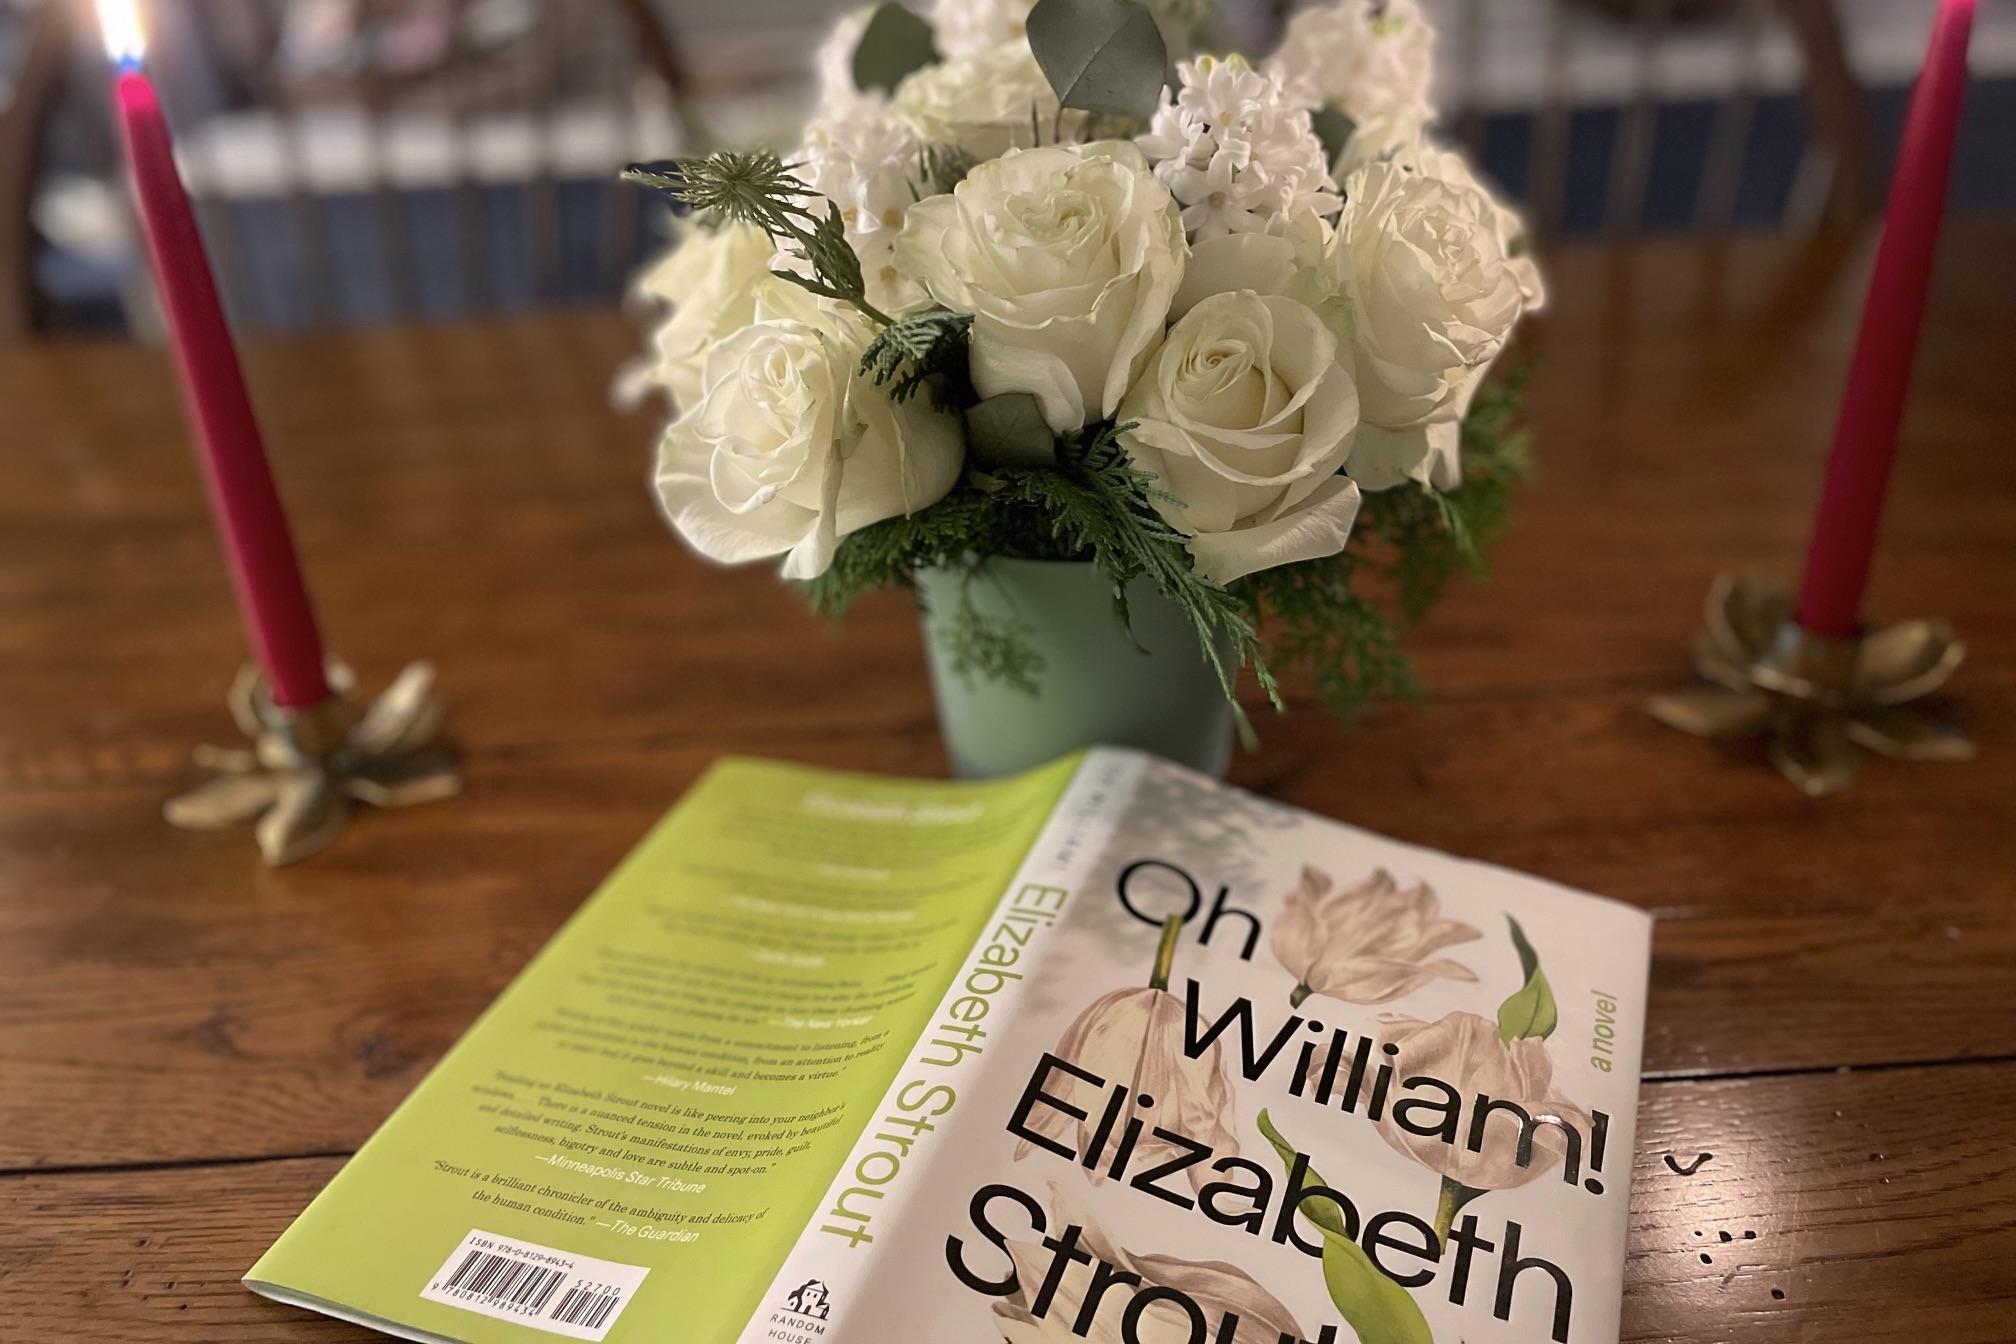 Oh, William! by Elizabeth Strout